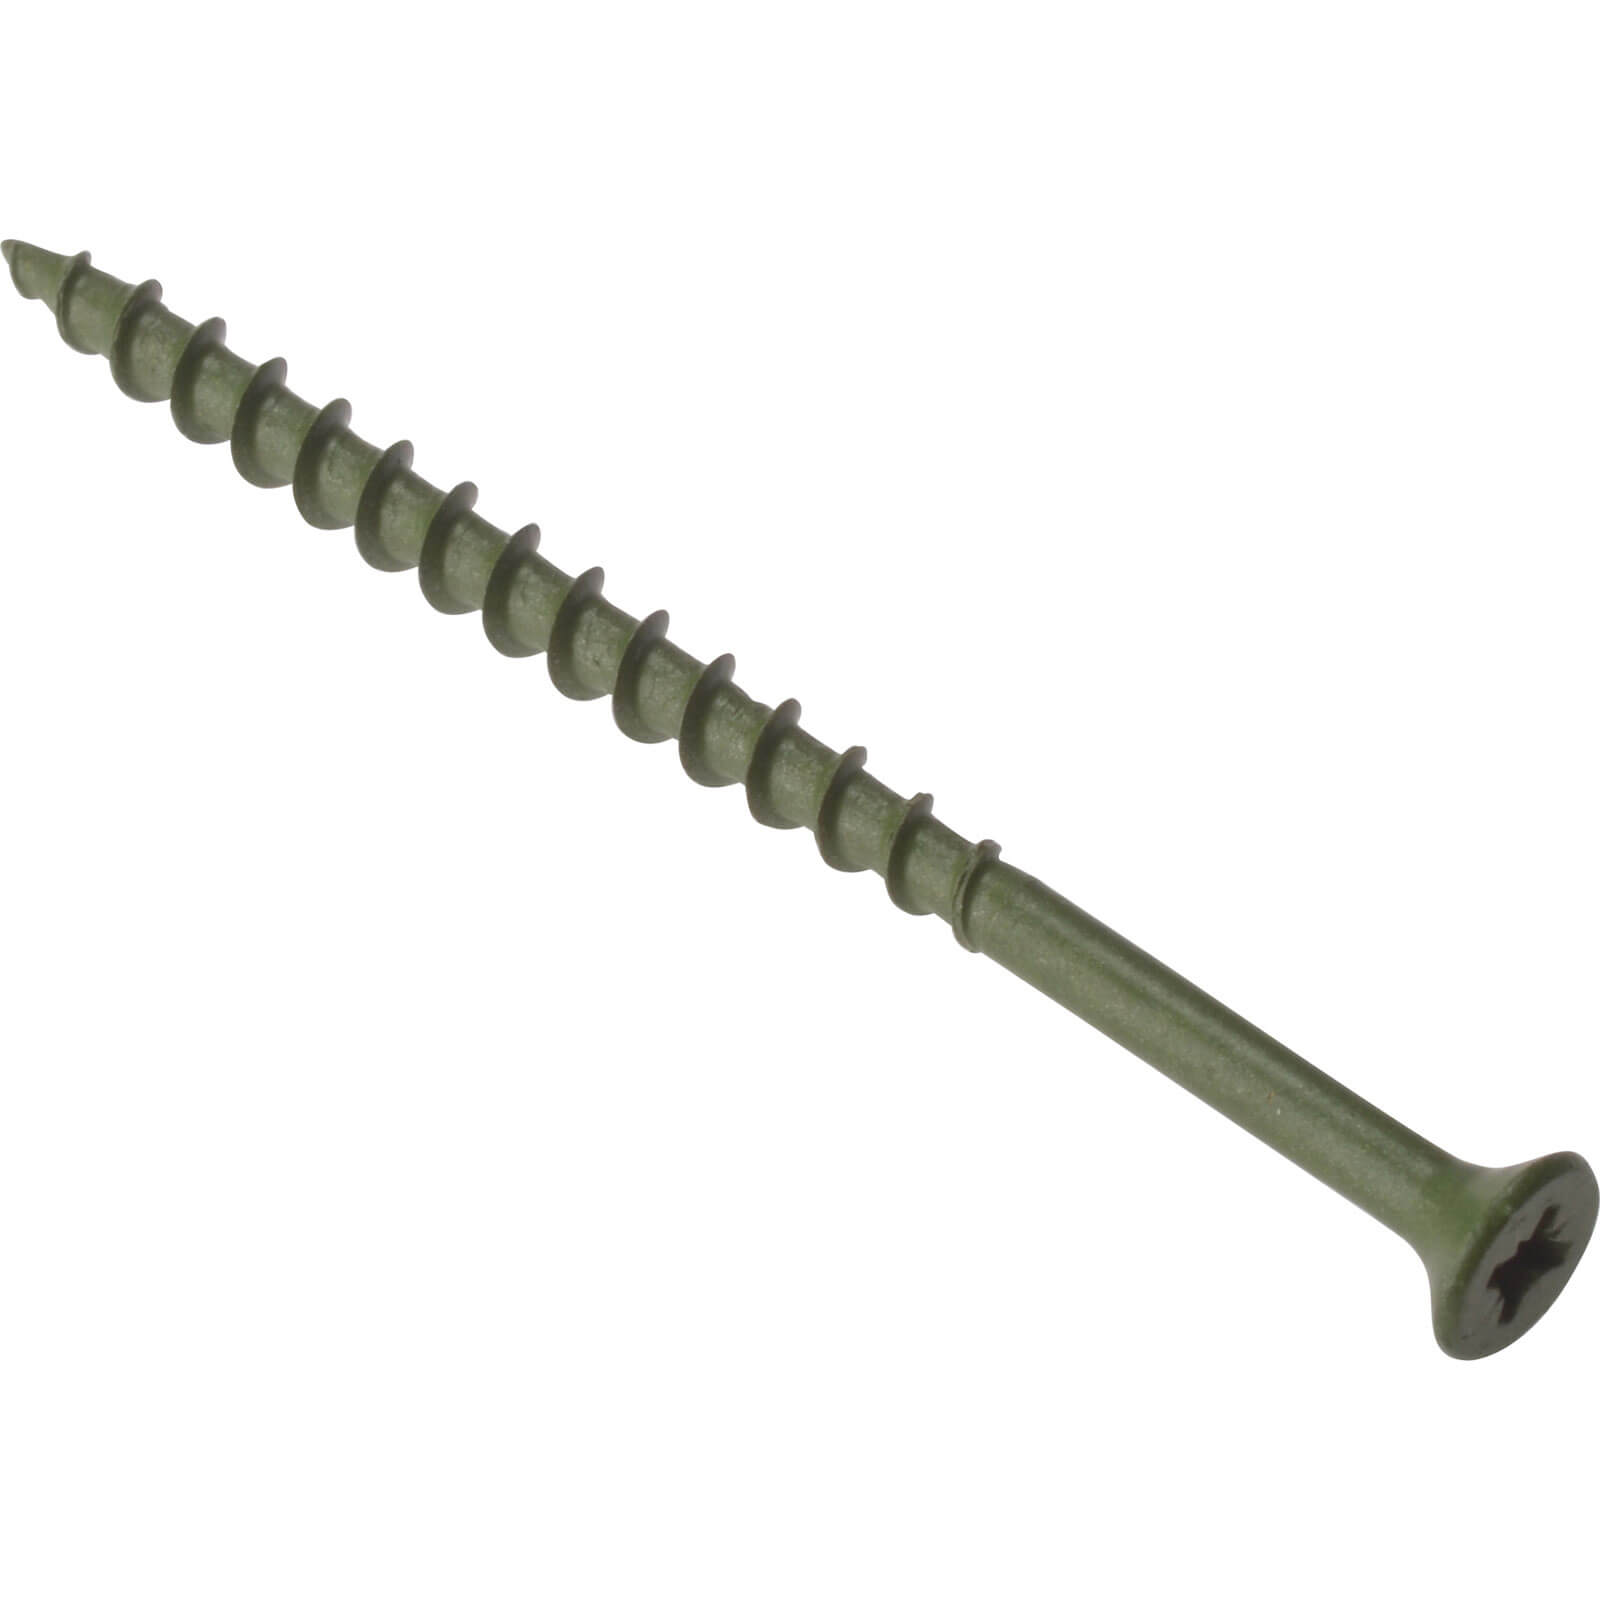 Image of ForgeFix Decking Screw Pozi ST Green Anti-Corrosion Treated 4.5mm 60mm Pack of 1000